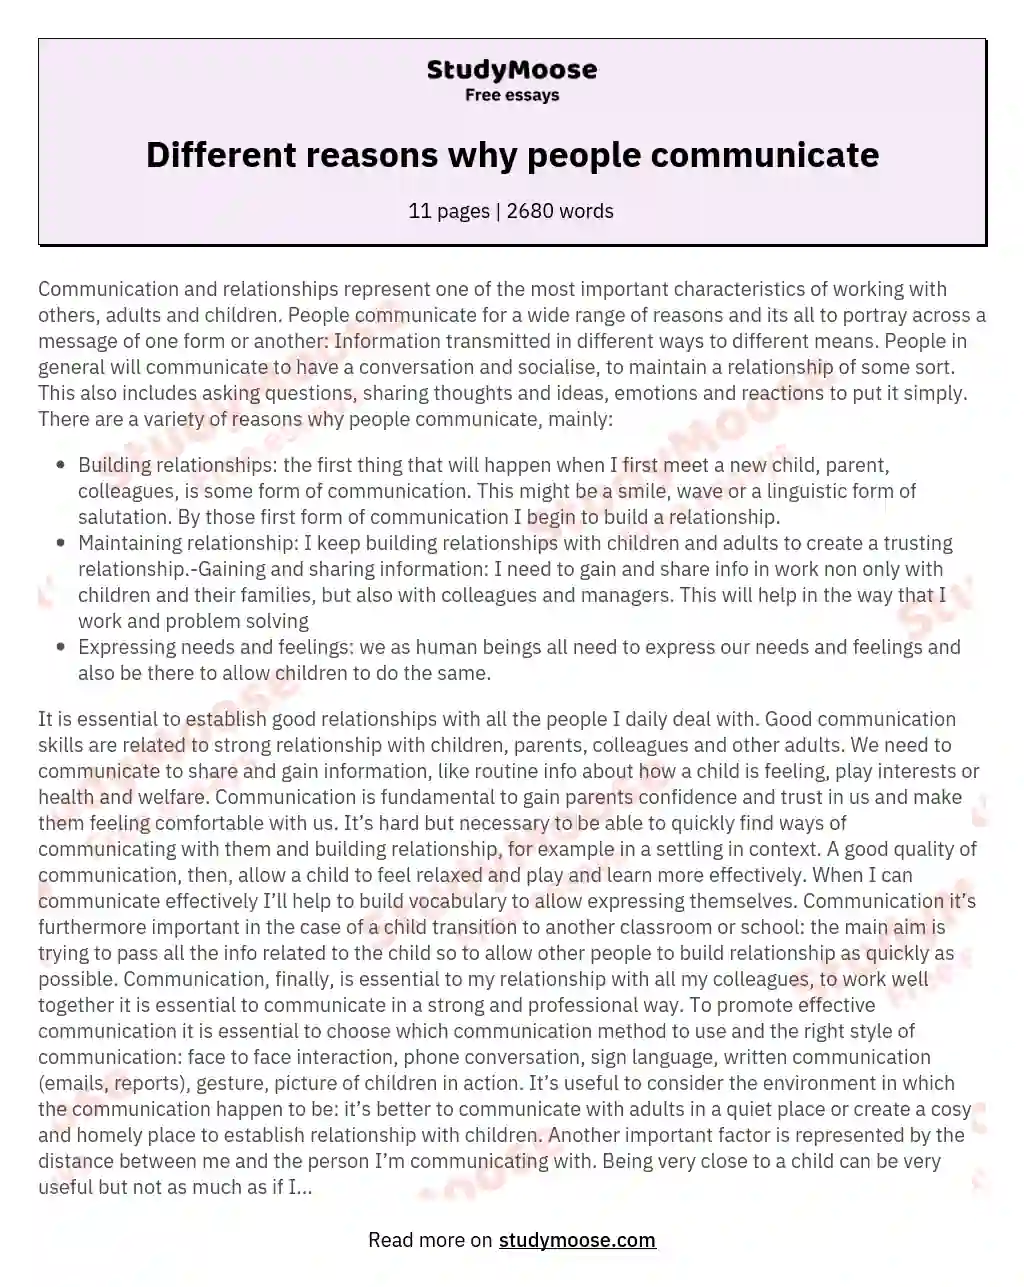 Different reasons why people communicate essay